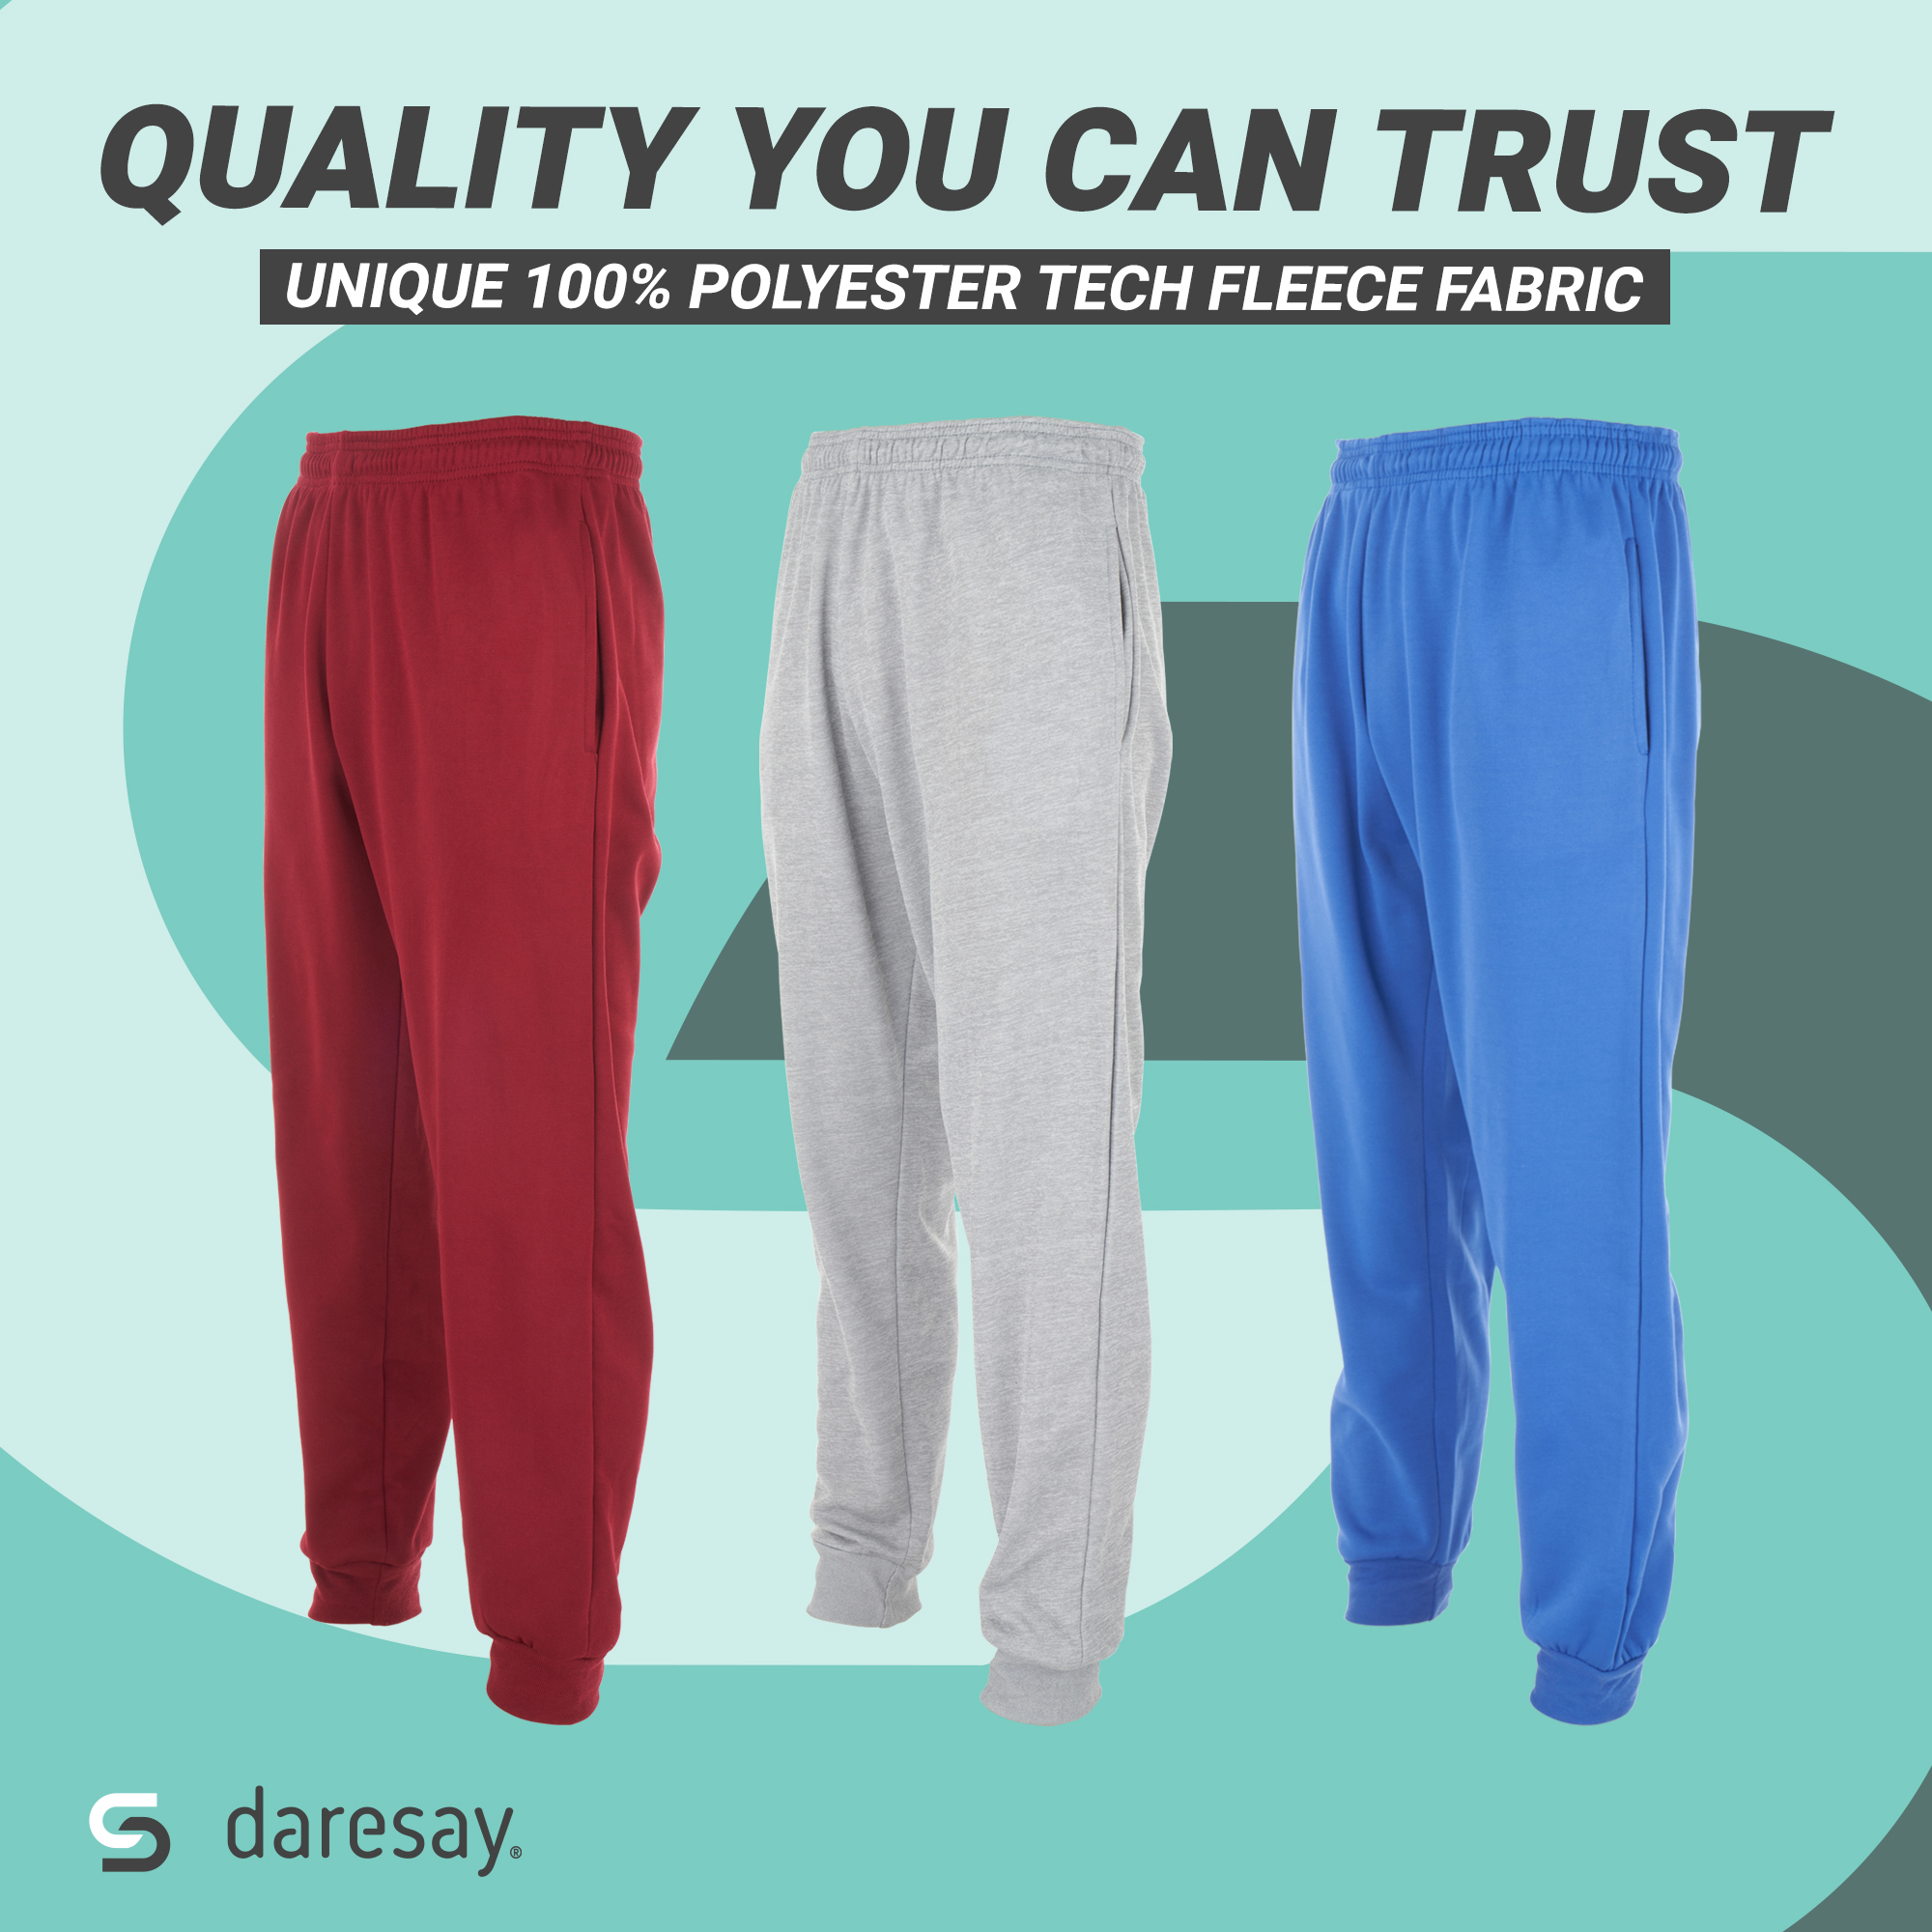 DARESAY [3-Pack] Men's Tech Fleece Joggers Dry Fit Performance Sweatpants (Up To Size 3XL) - image 4 of 5